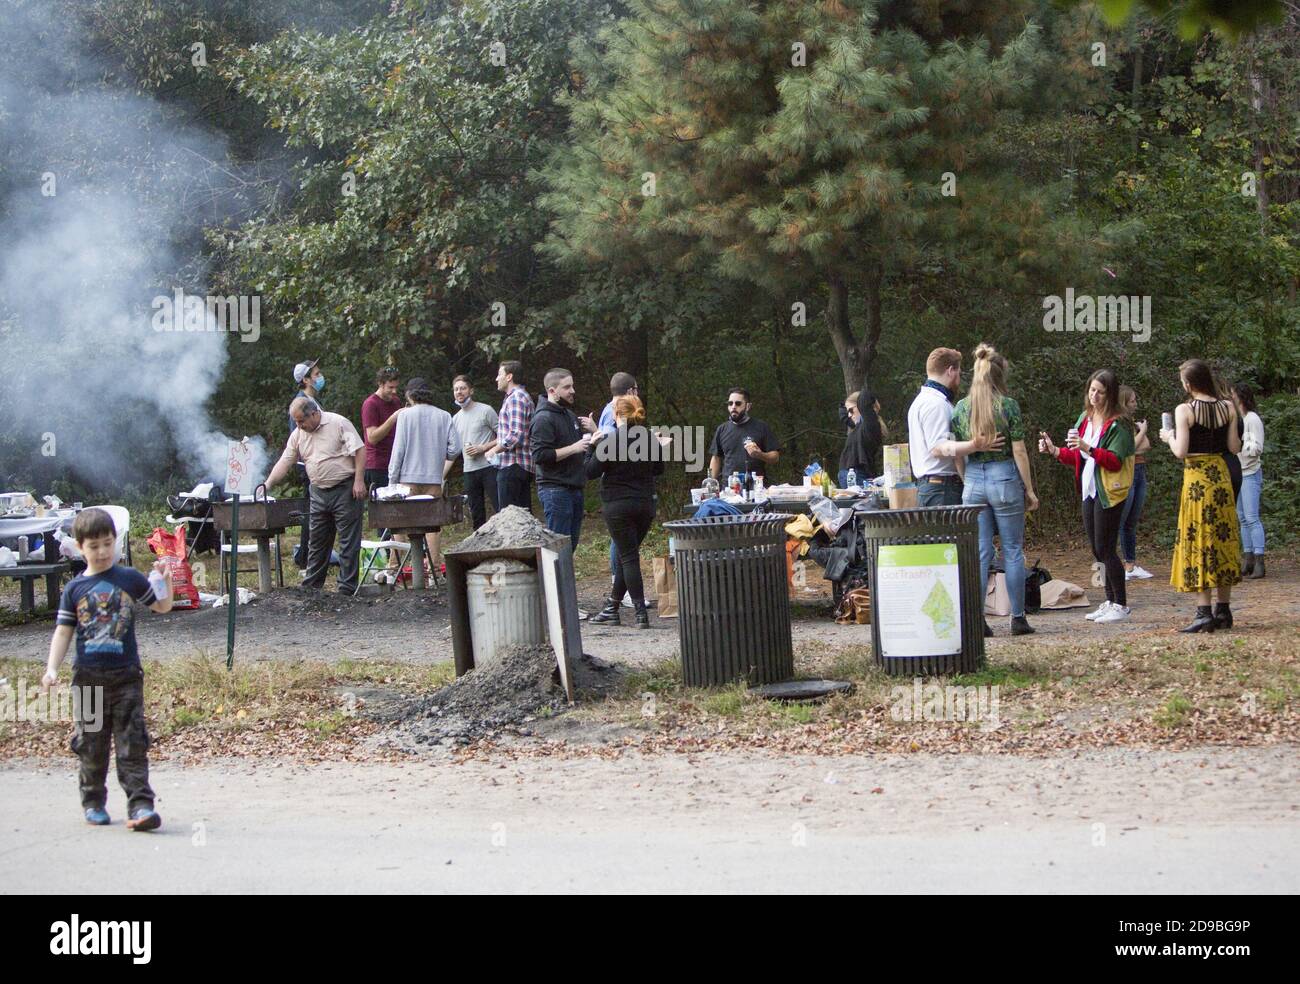 People enjoy themselves at a barbecue party in Prospect Park feeling free and mainly maskless although it is the time of Covid-19 in autumn 2020. Stock Photo